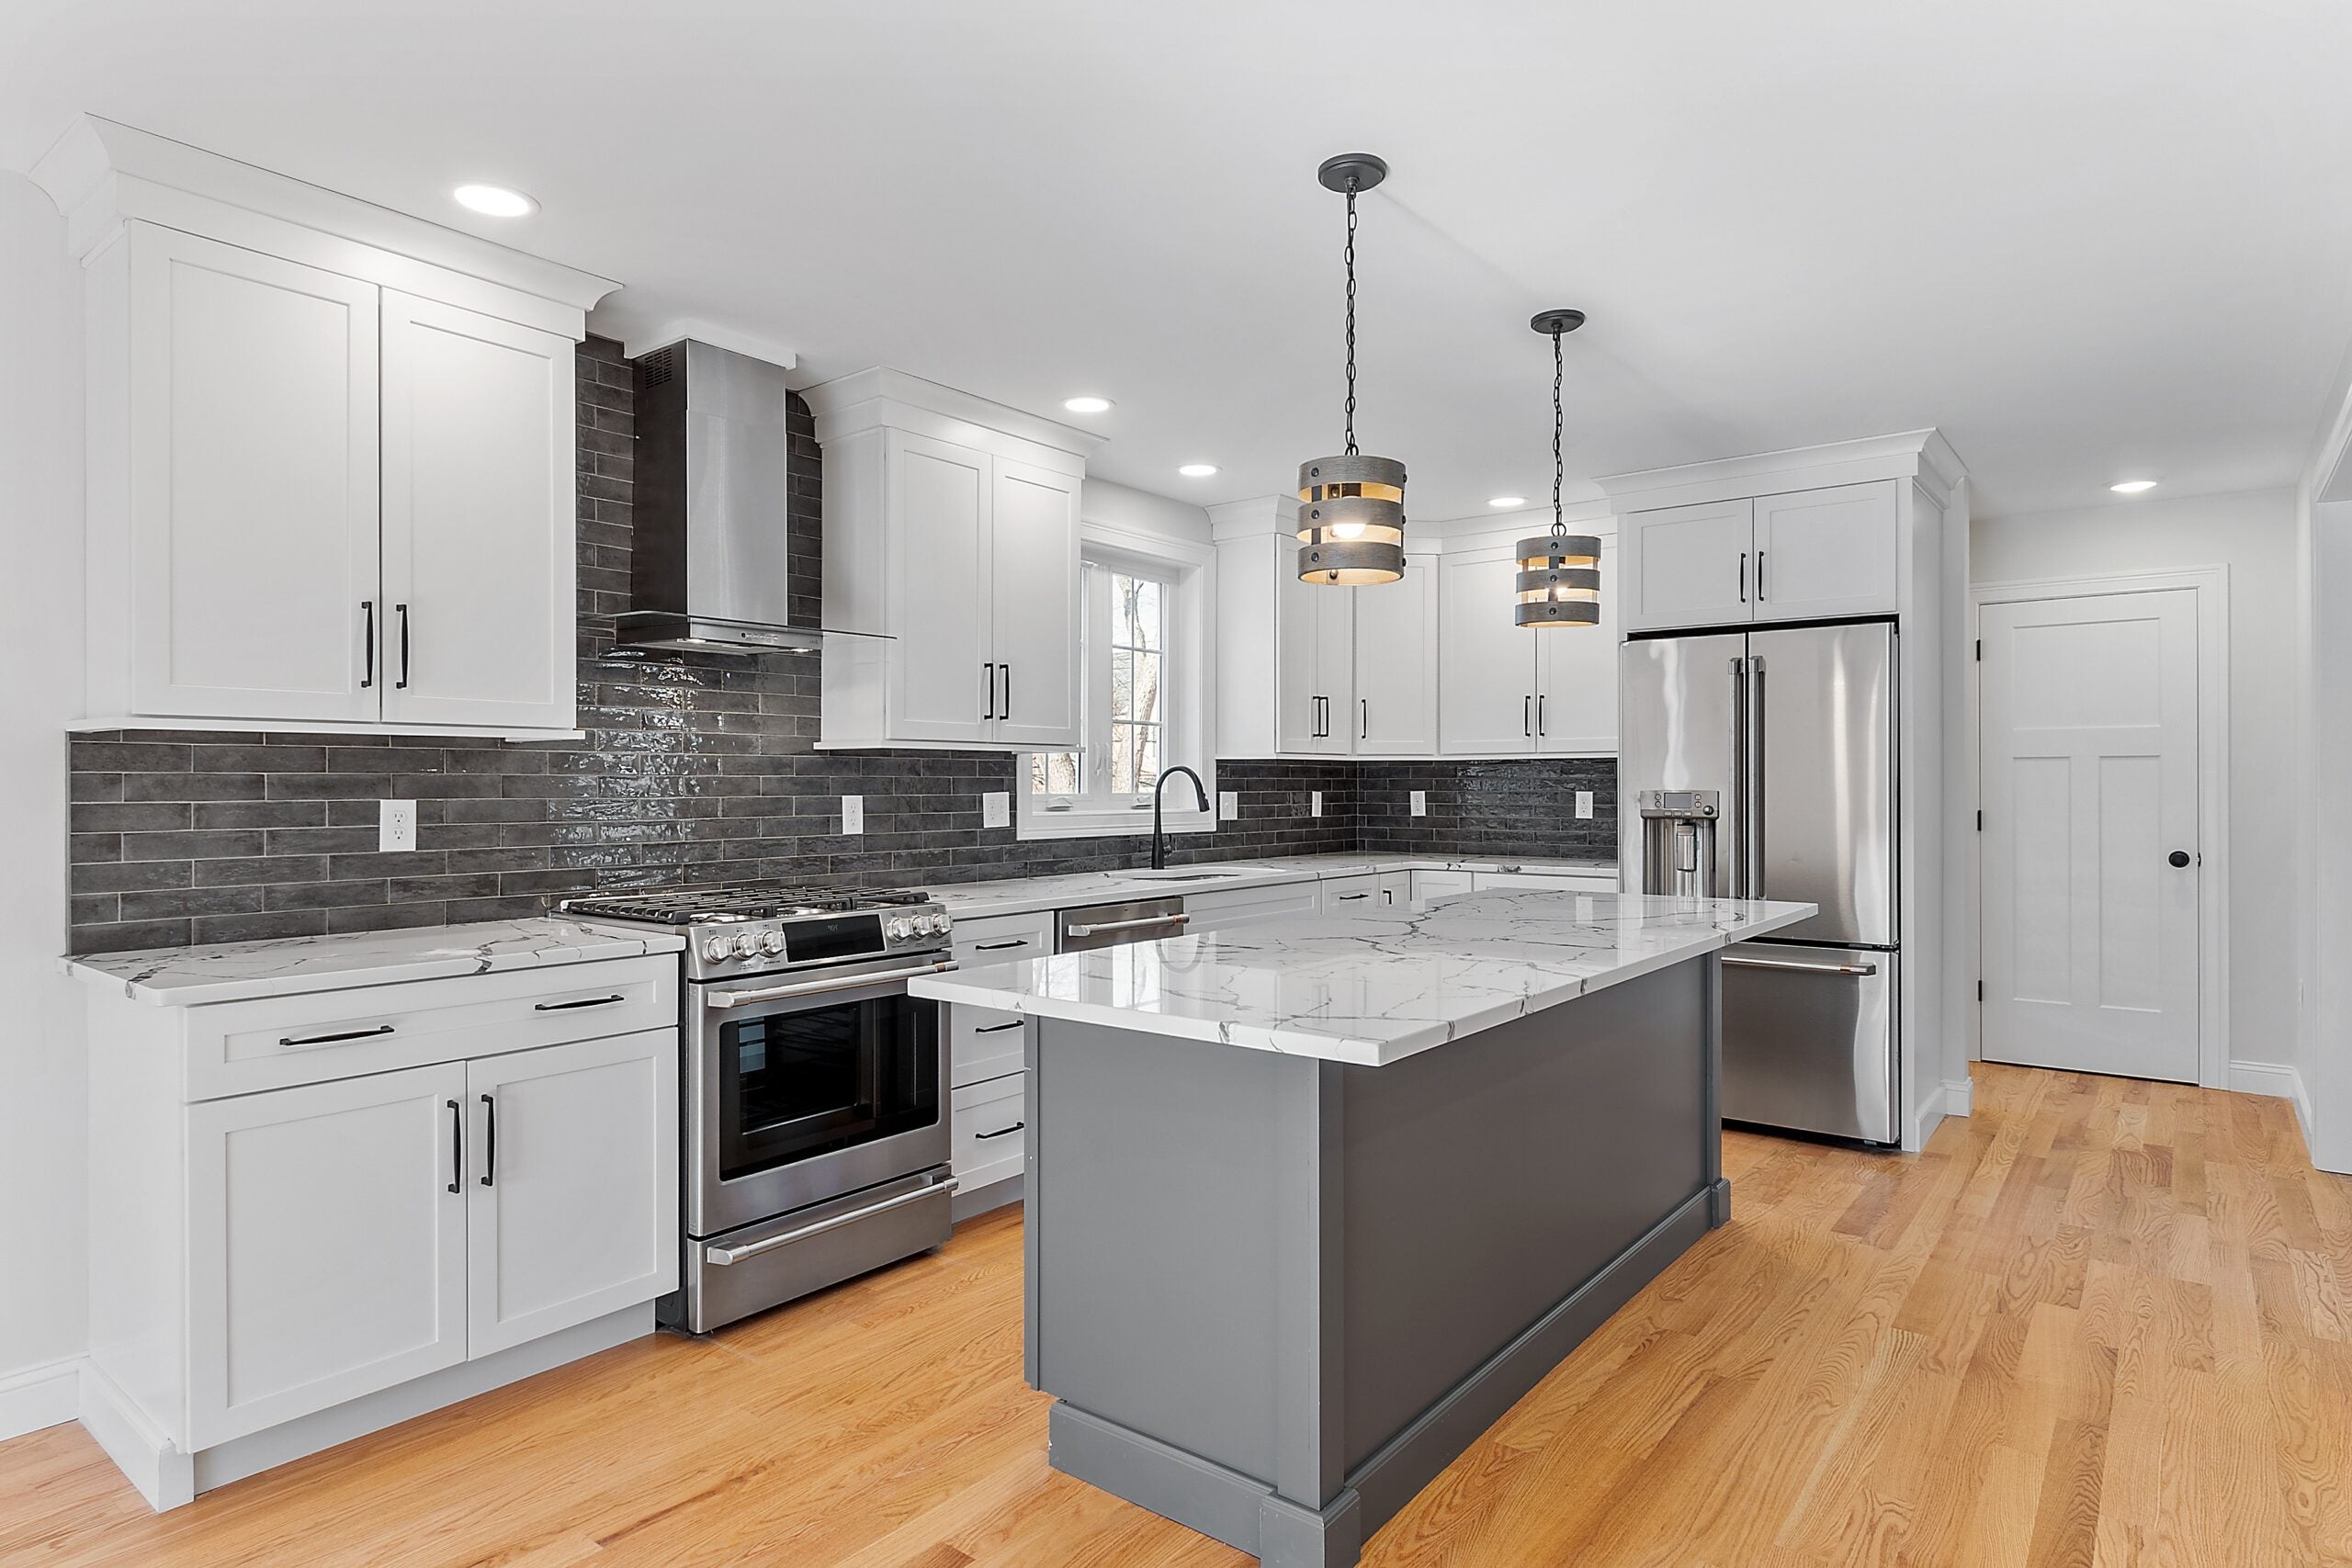 A longways view of a kitchen with a gray island with a light-colored countertop, white cabinets with black handles, a dark glass tile backsplash, and two pendant lights with shades that look like straps of wood.